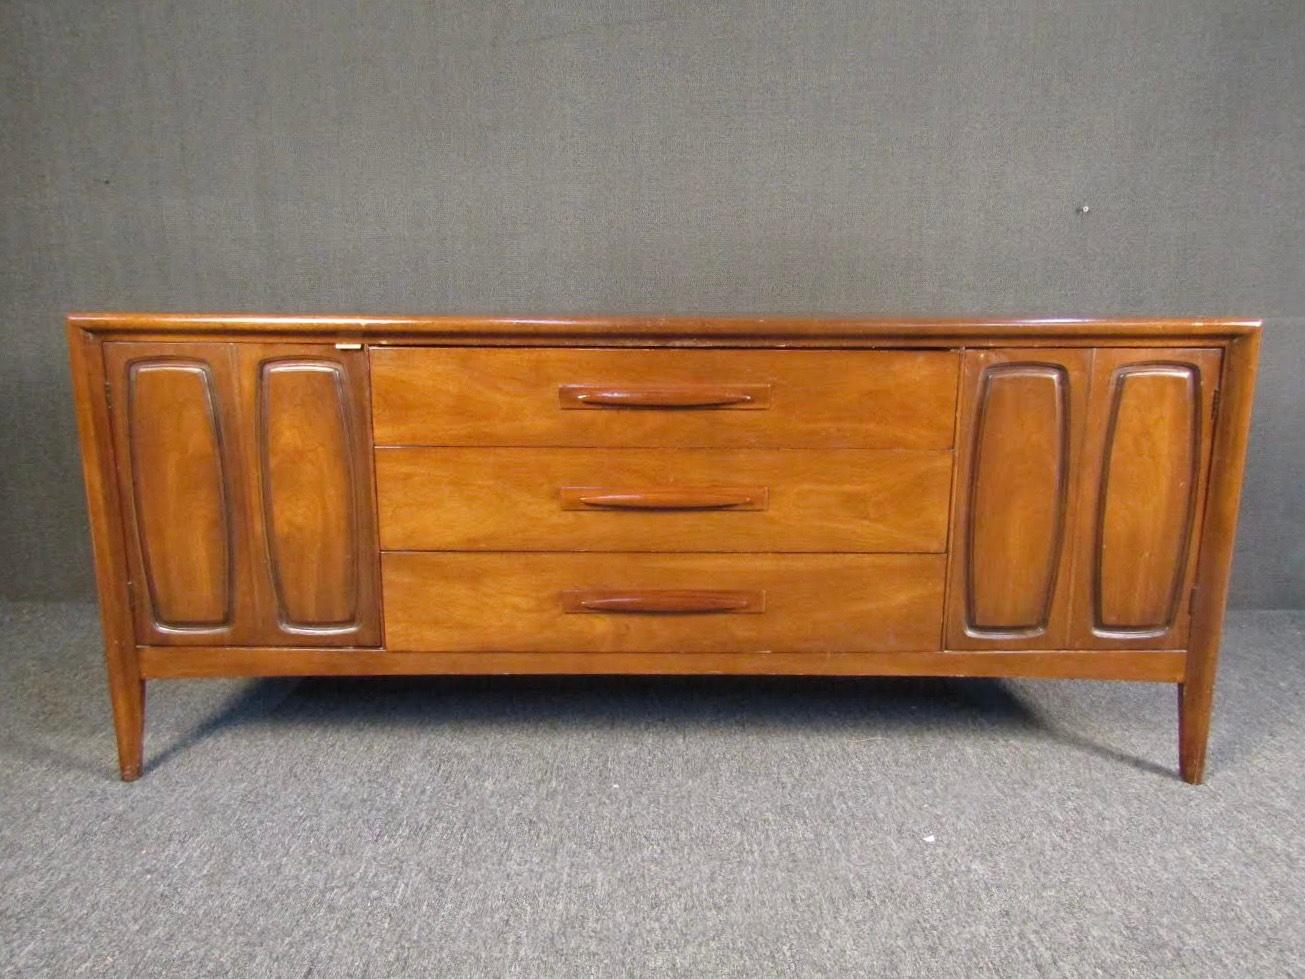 Gorgeous Mid-Century Modern server in rich walnut. Three large drawers with sculpted handles pull out, along with swinging doors on each side revealing spacious compartments. Please confirm item location with seller (NY/NJ).